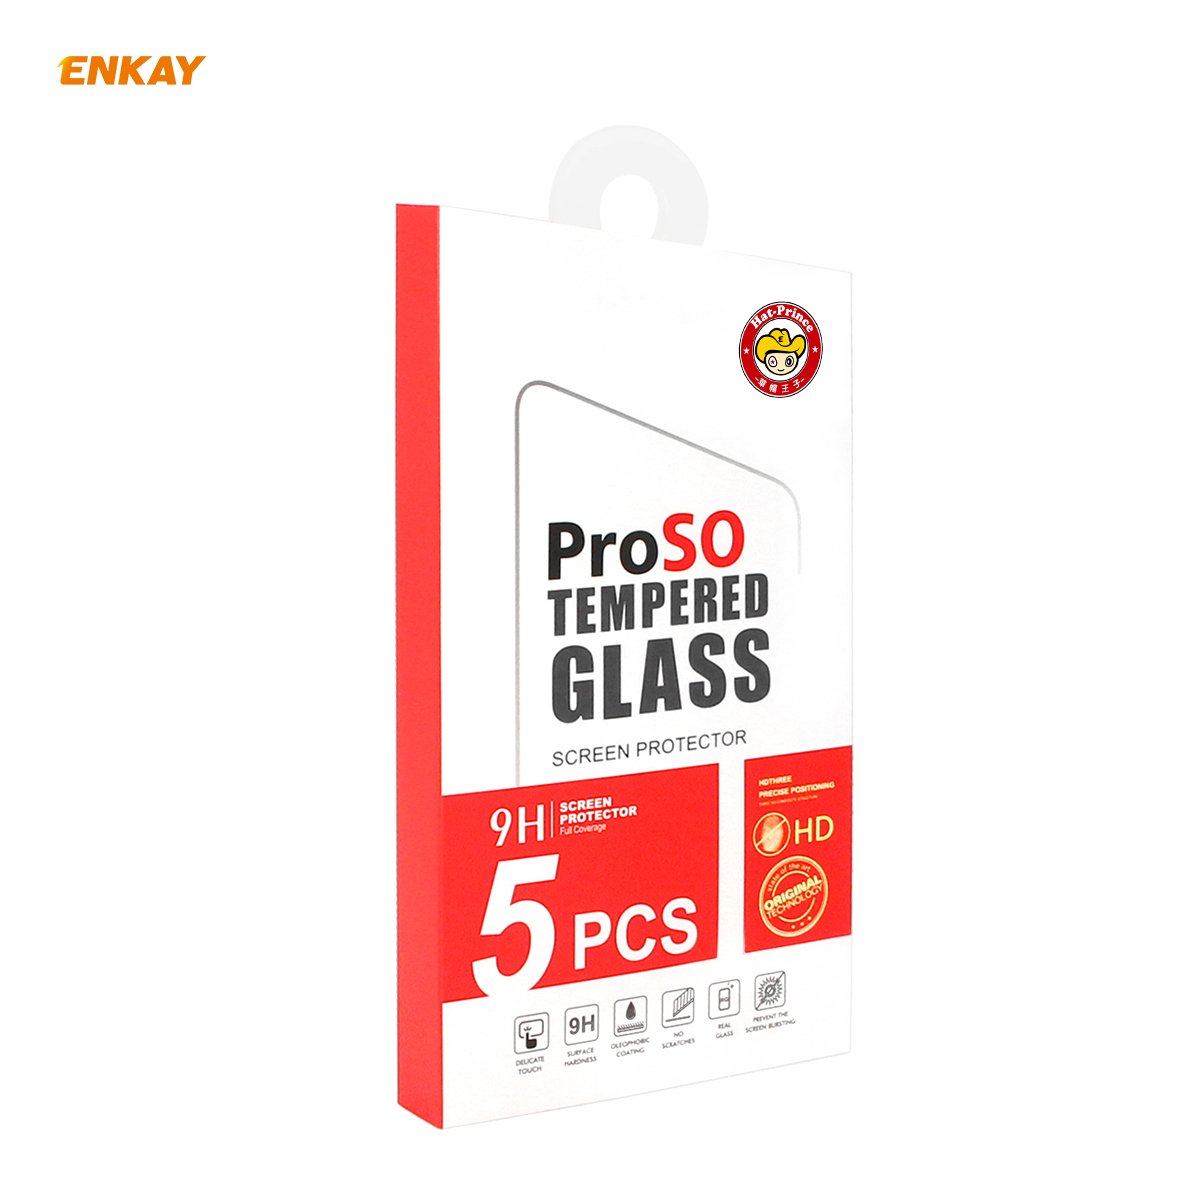 ENKAY-12510-Pcs-9H-Crystal-Clear-Anti-Explosion-Anti-Scratch-Full-Glue-Full-Coverage-Tempered-Glass--1730138-12